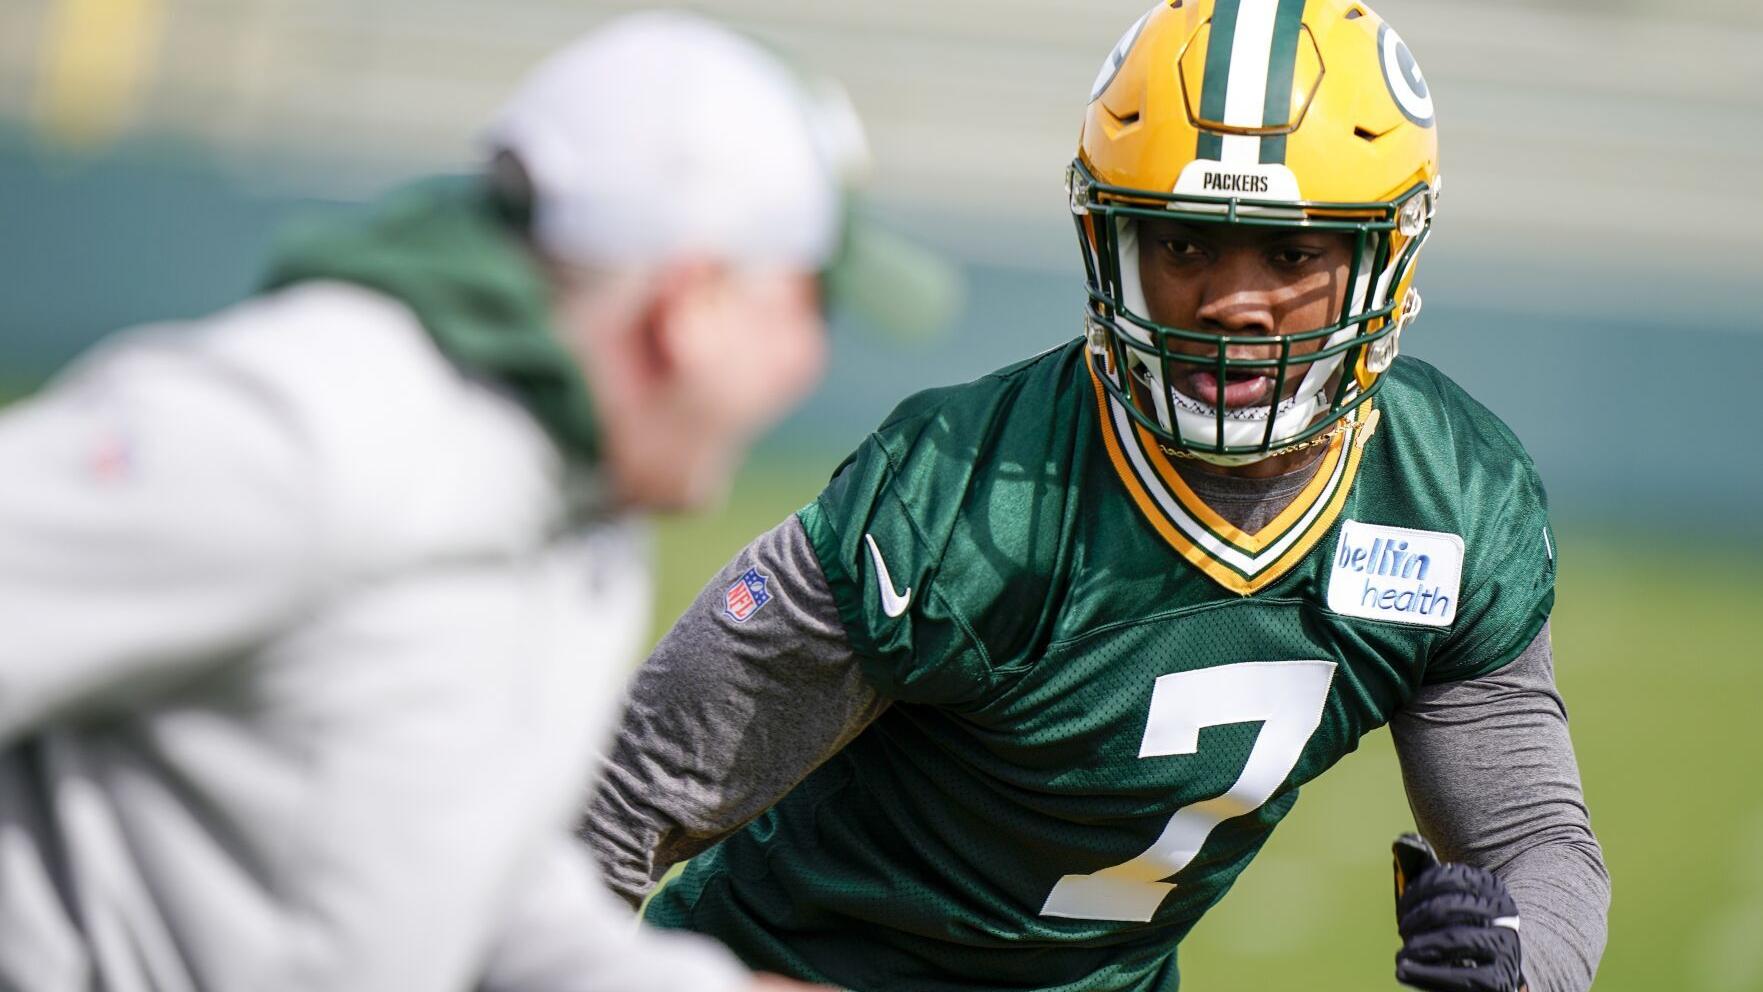 Dream chasers: Packers rookies get to work u2014 and work to move past awe of their first day in the NFL